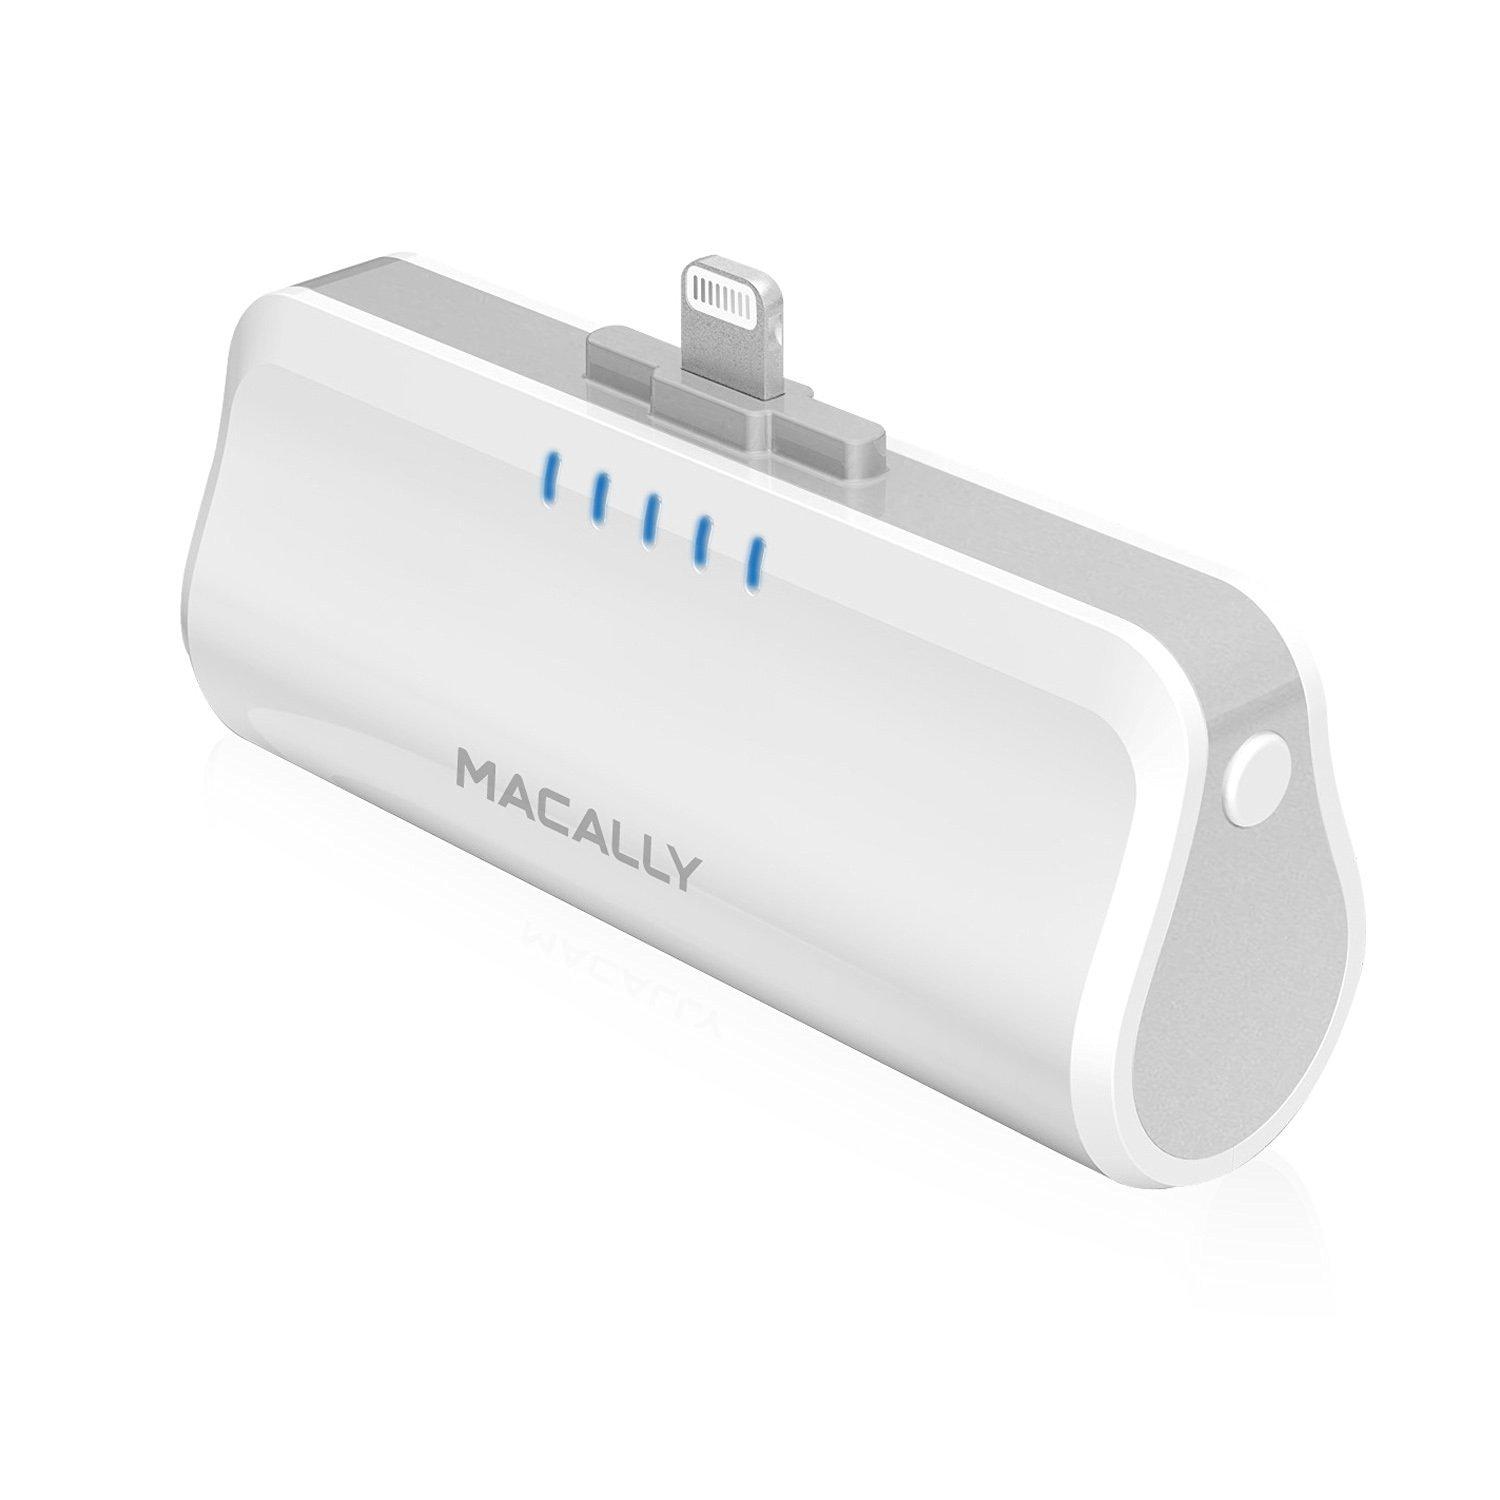 Macally 2600mAh Portable Battery Charger with Lightning Connecto